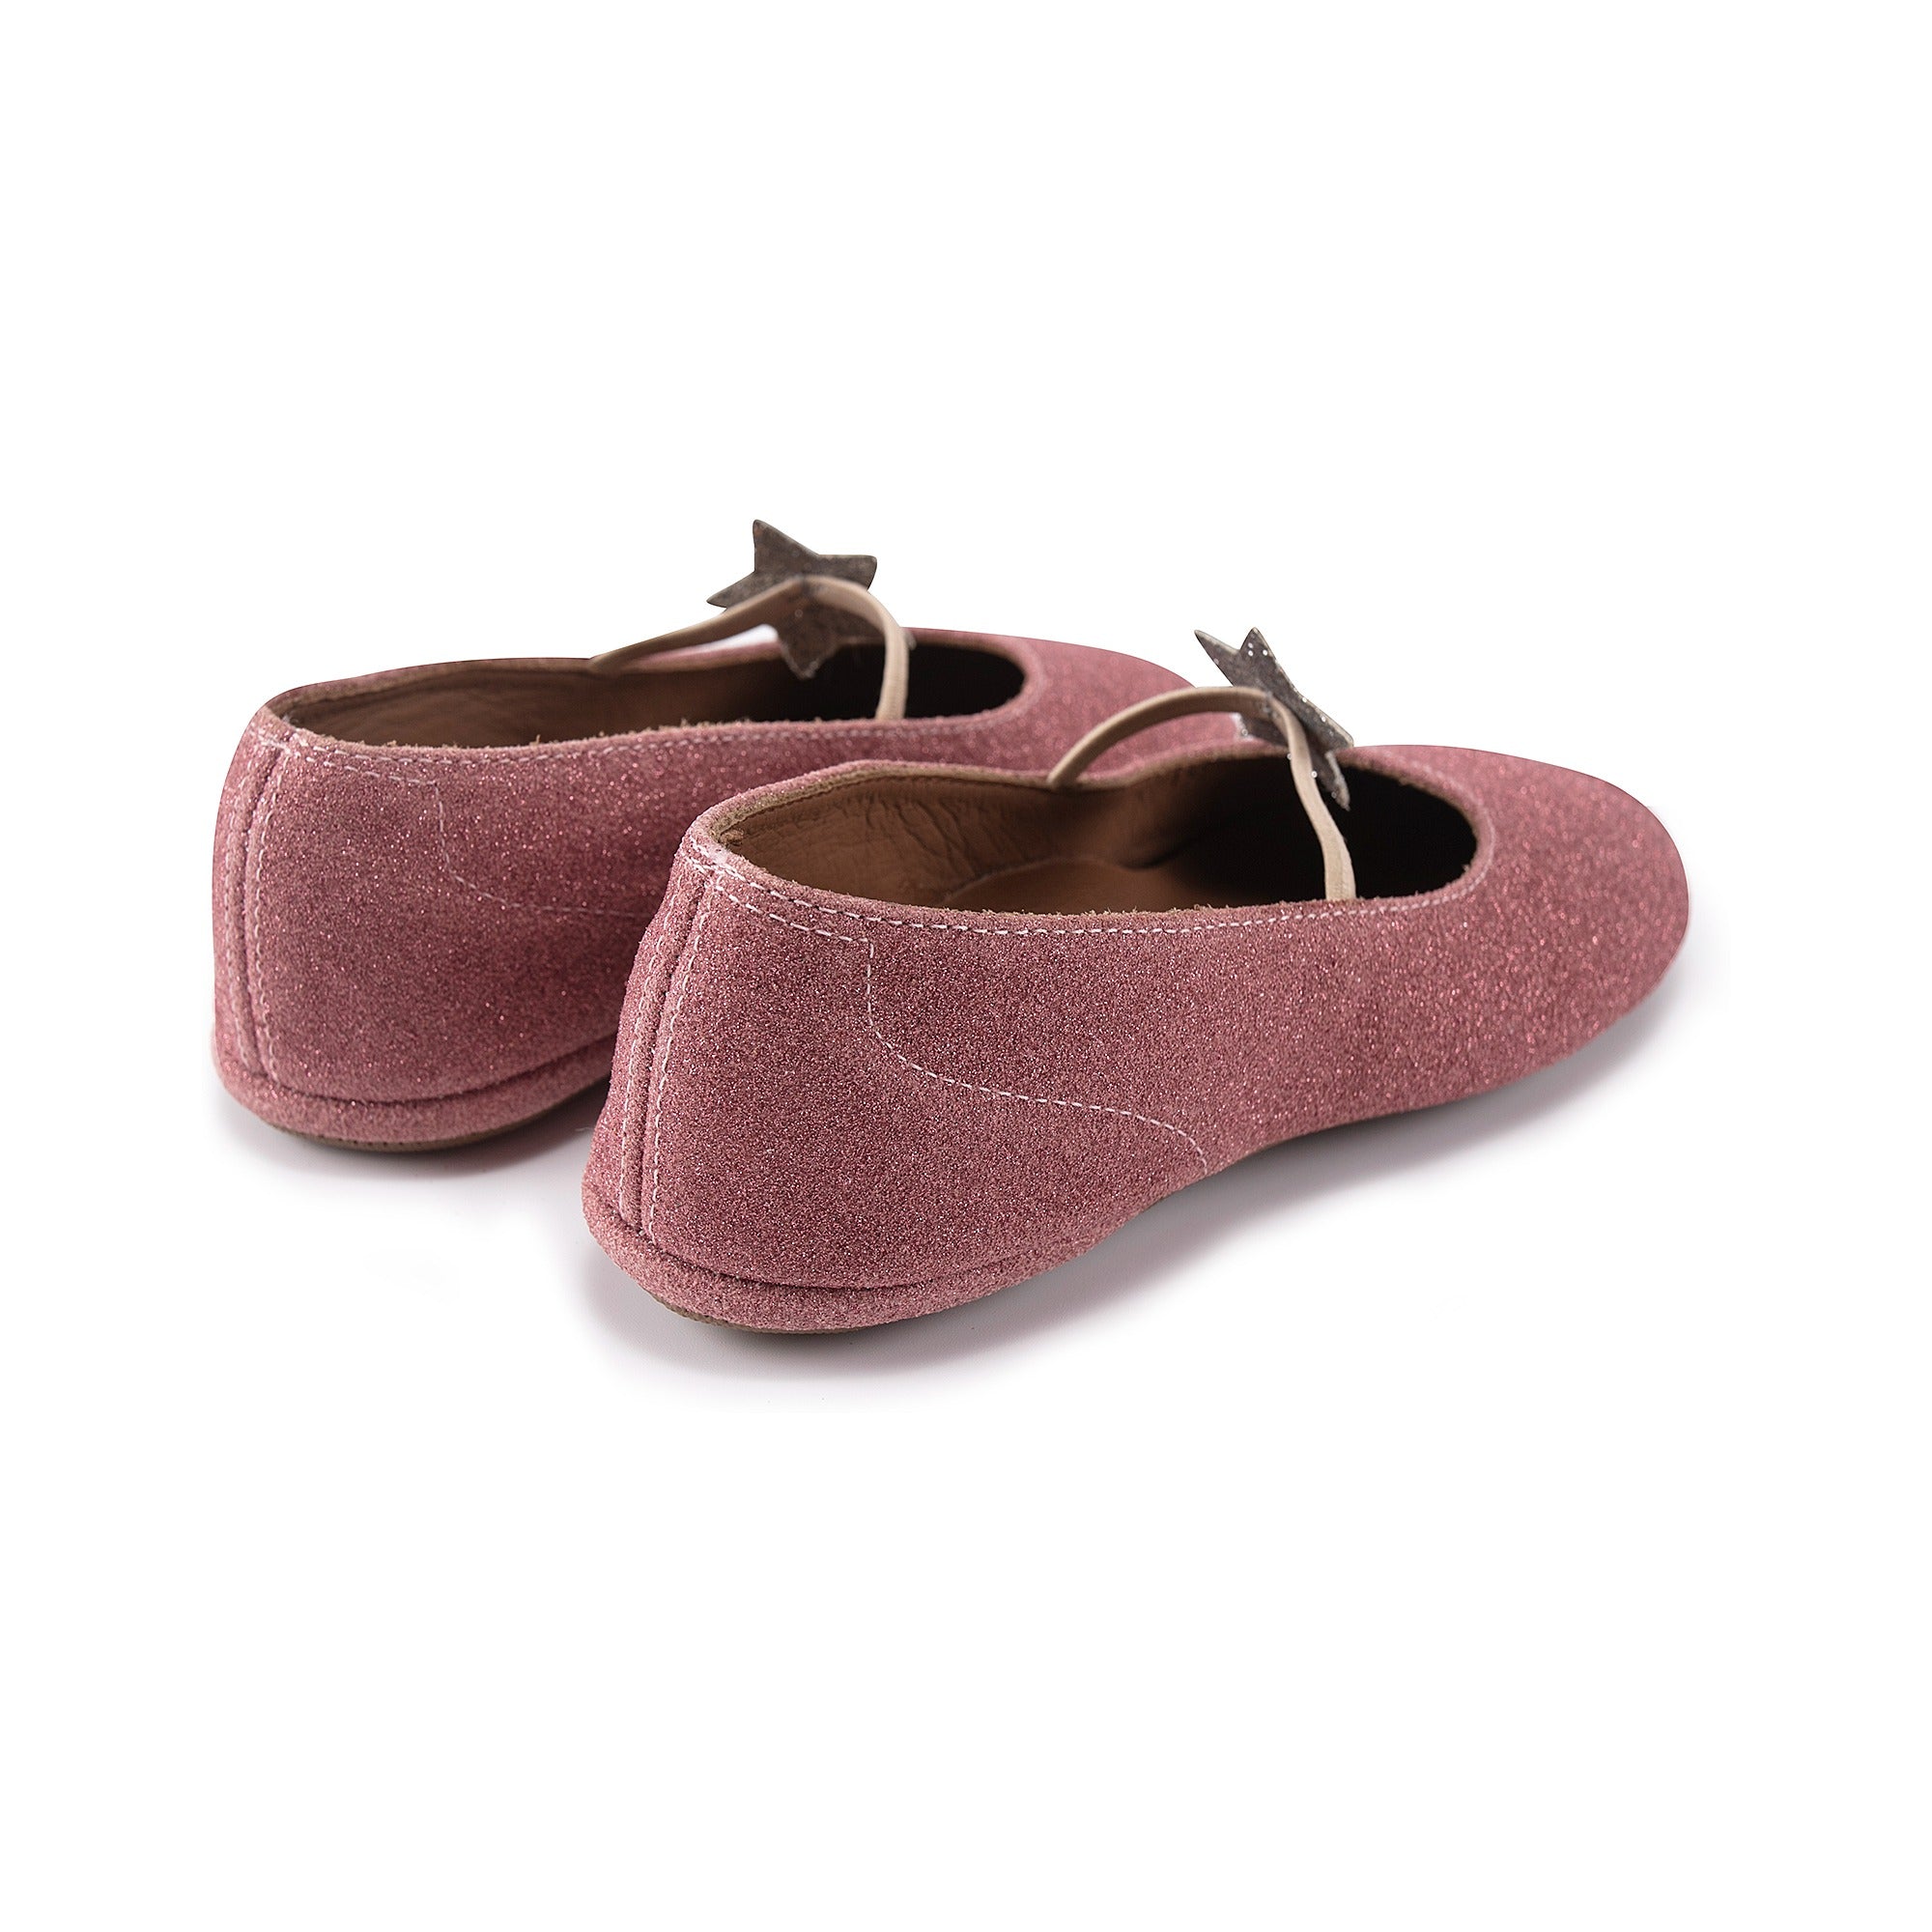 Girls Pink Leather Shoes